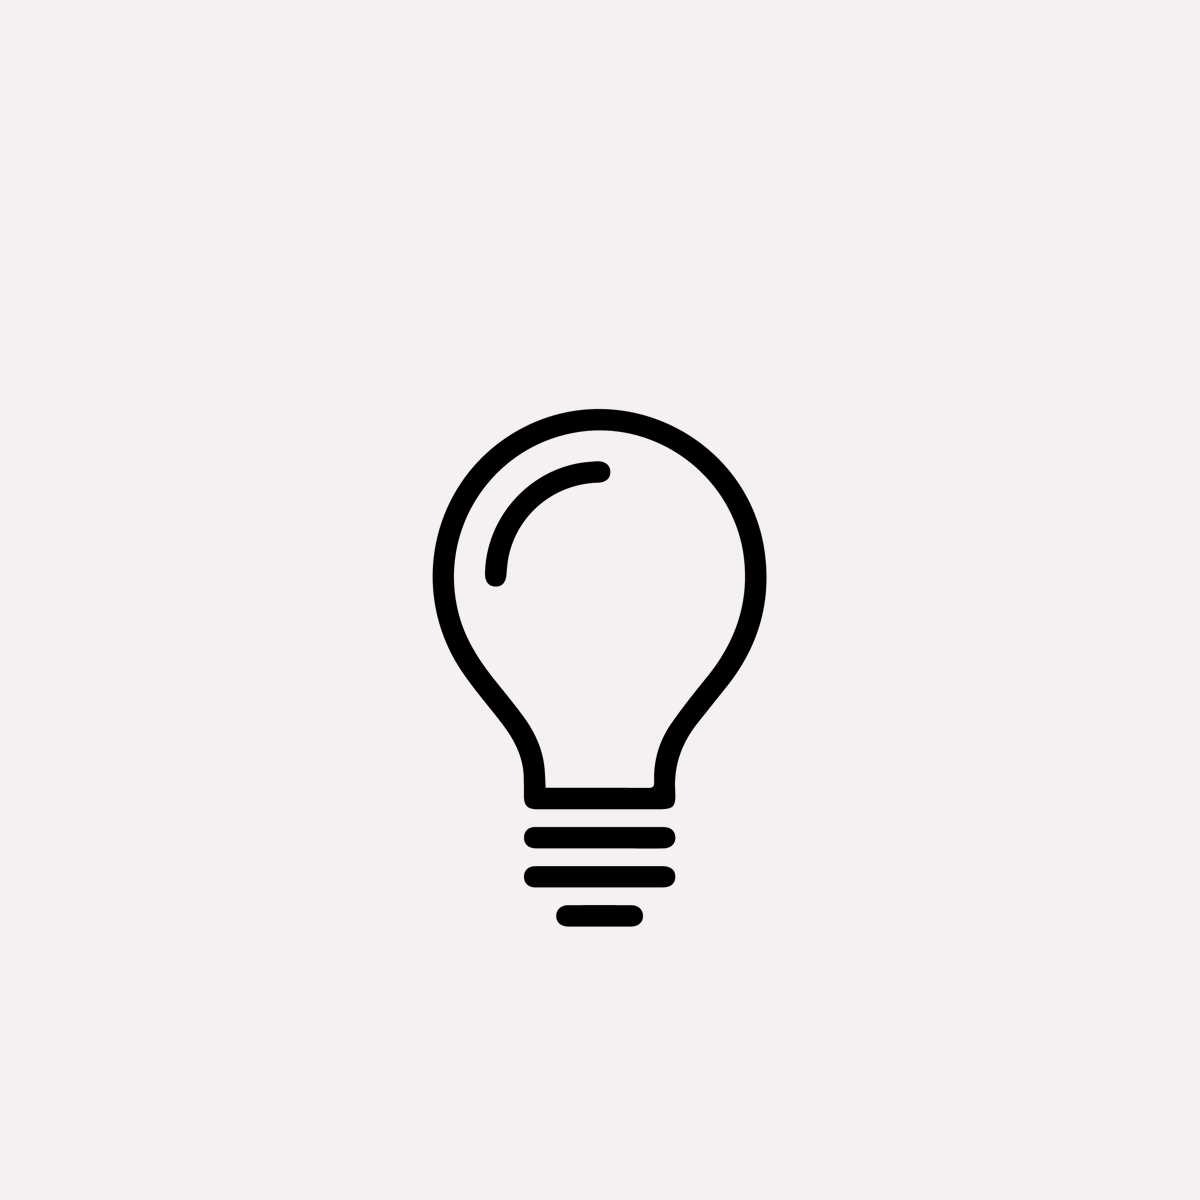 Pictured is drawn image of light bulb